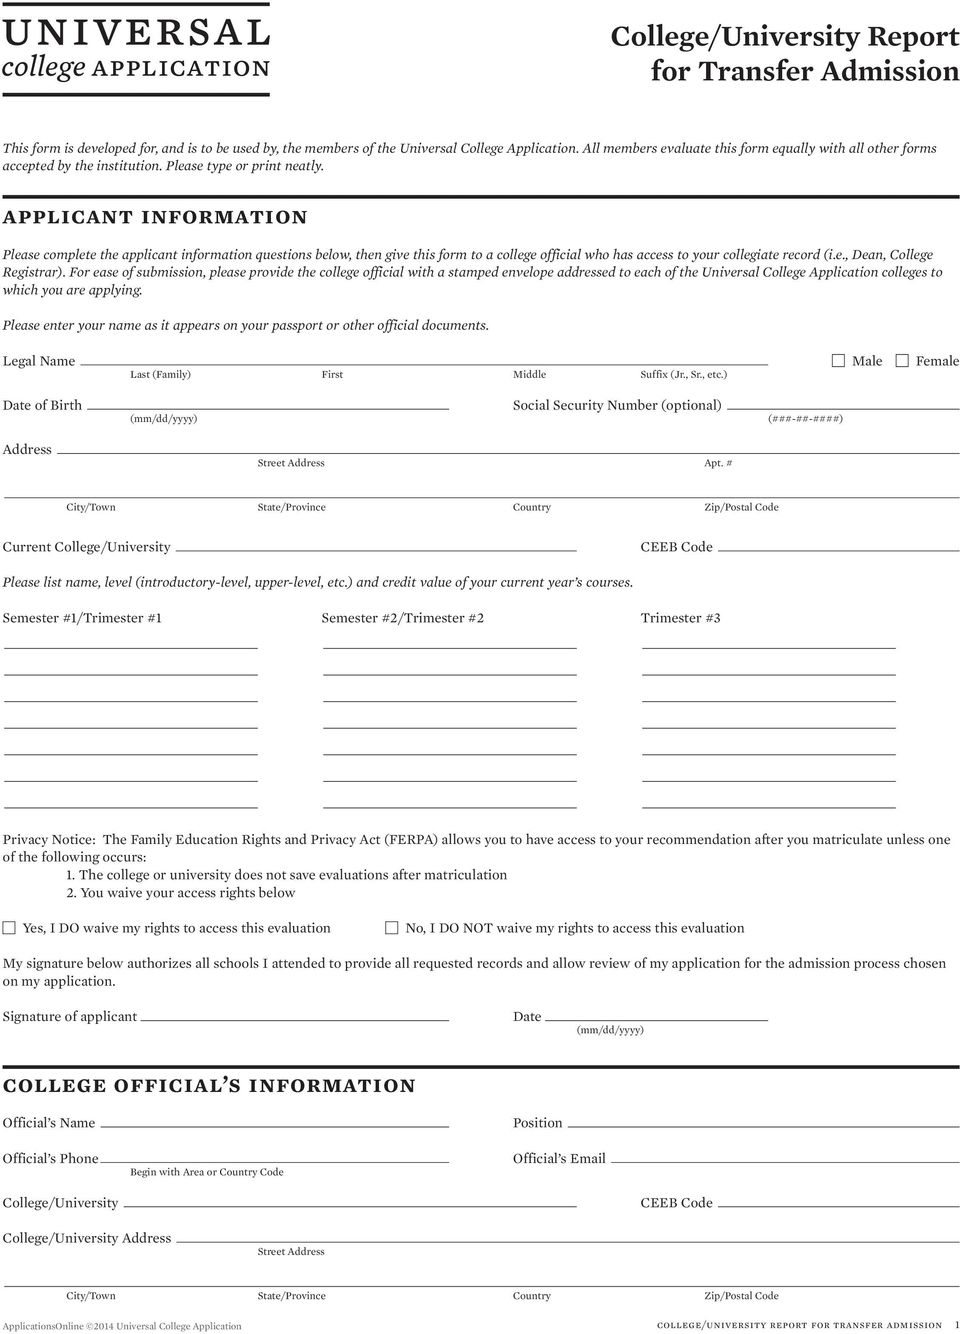 applicant information Please complete the applicant information questions below, then give this form to a college official who has access to your collegiate record (i.e., Dean, College Registrar).